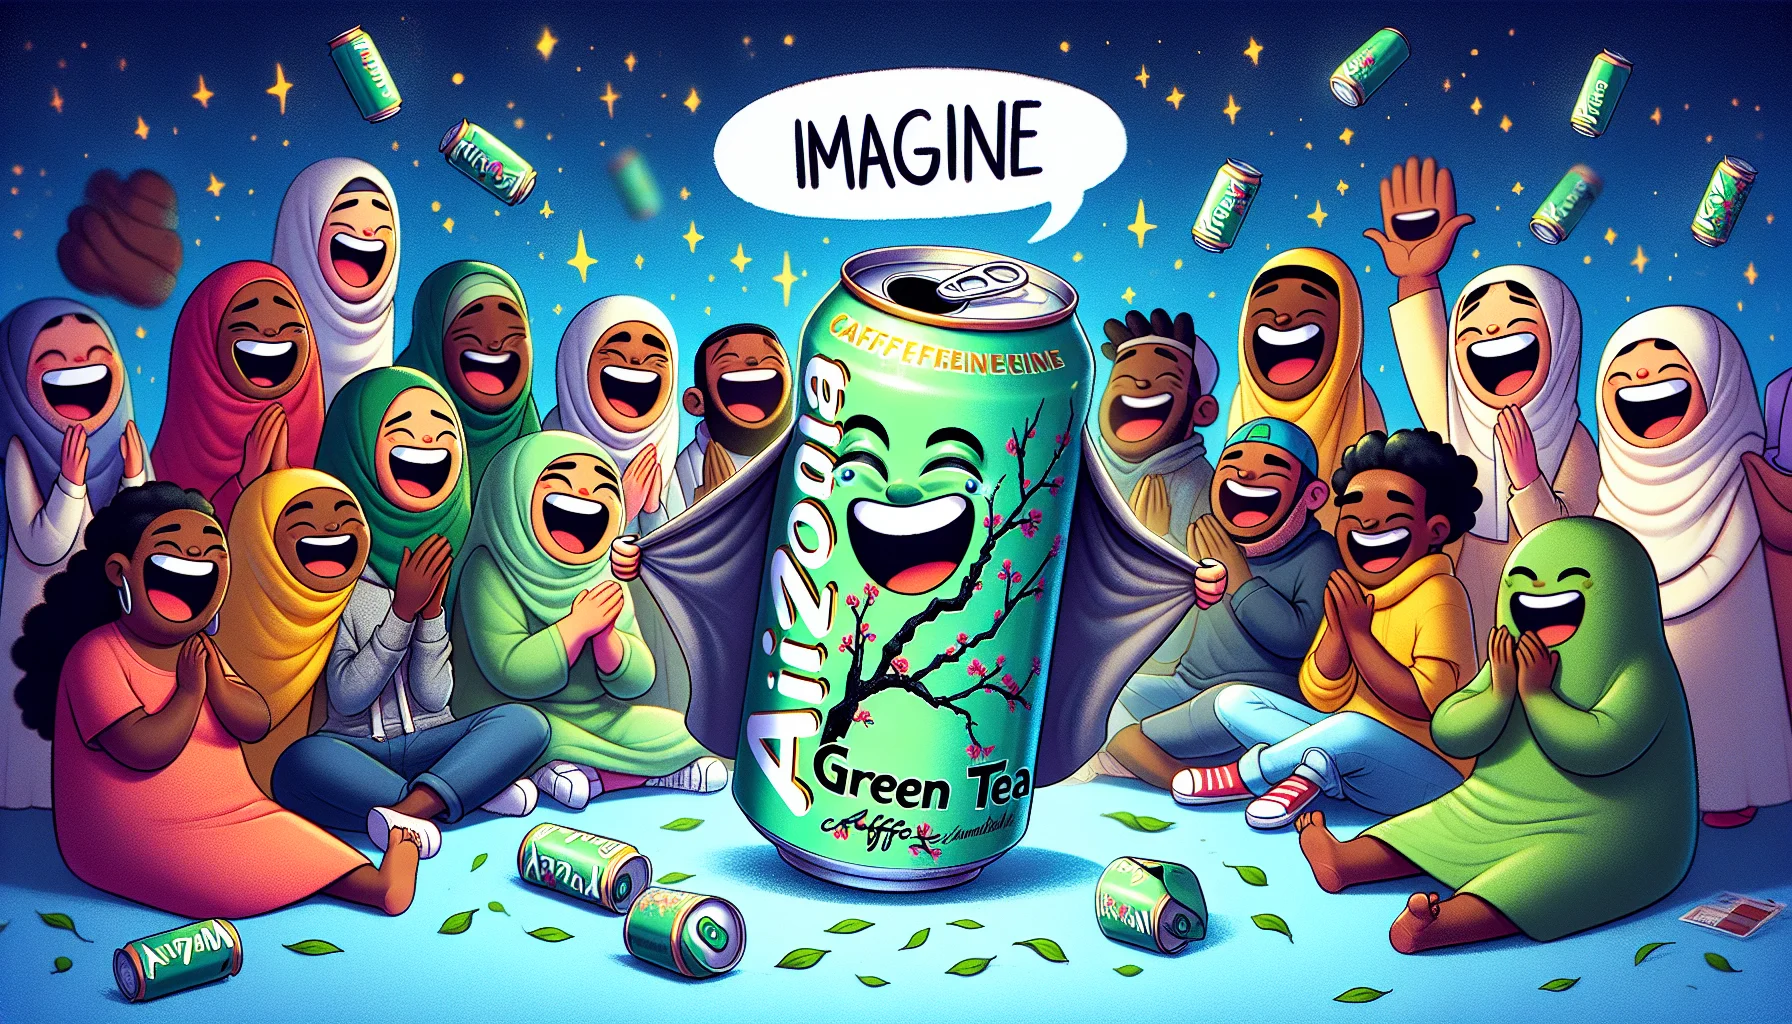 Imagine a humorous scene- a can of Arizona green tea has been personified; sitting upright with animated googly eyes and a wide smile. It's illustrated to mimic an act of pulling an invisible cape over its label to reveal the word 'caffeine' much like a magician revealing a hidden trick. Around the can, laughing characters of diverse descents: Black, Hispanic, South Asian, Caucasian, Middle-Eastern, and Asian. Each one holding their own cans, their expressions filled with excitement and amusement. All set against a whimsical background filled with floating tea leaves and starry sparkles.